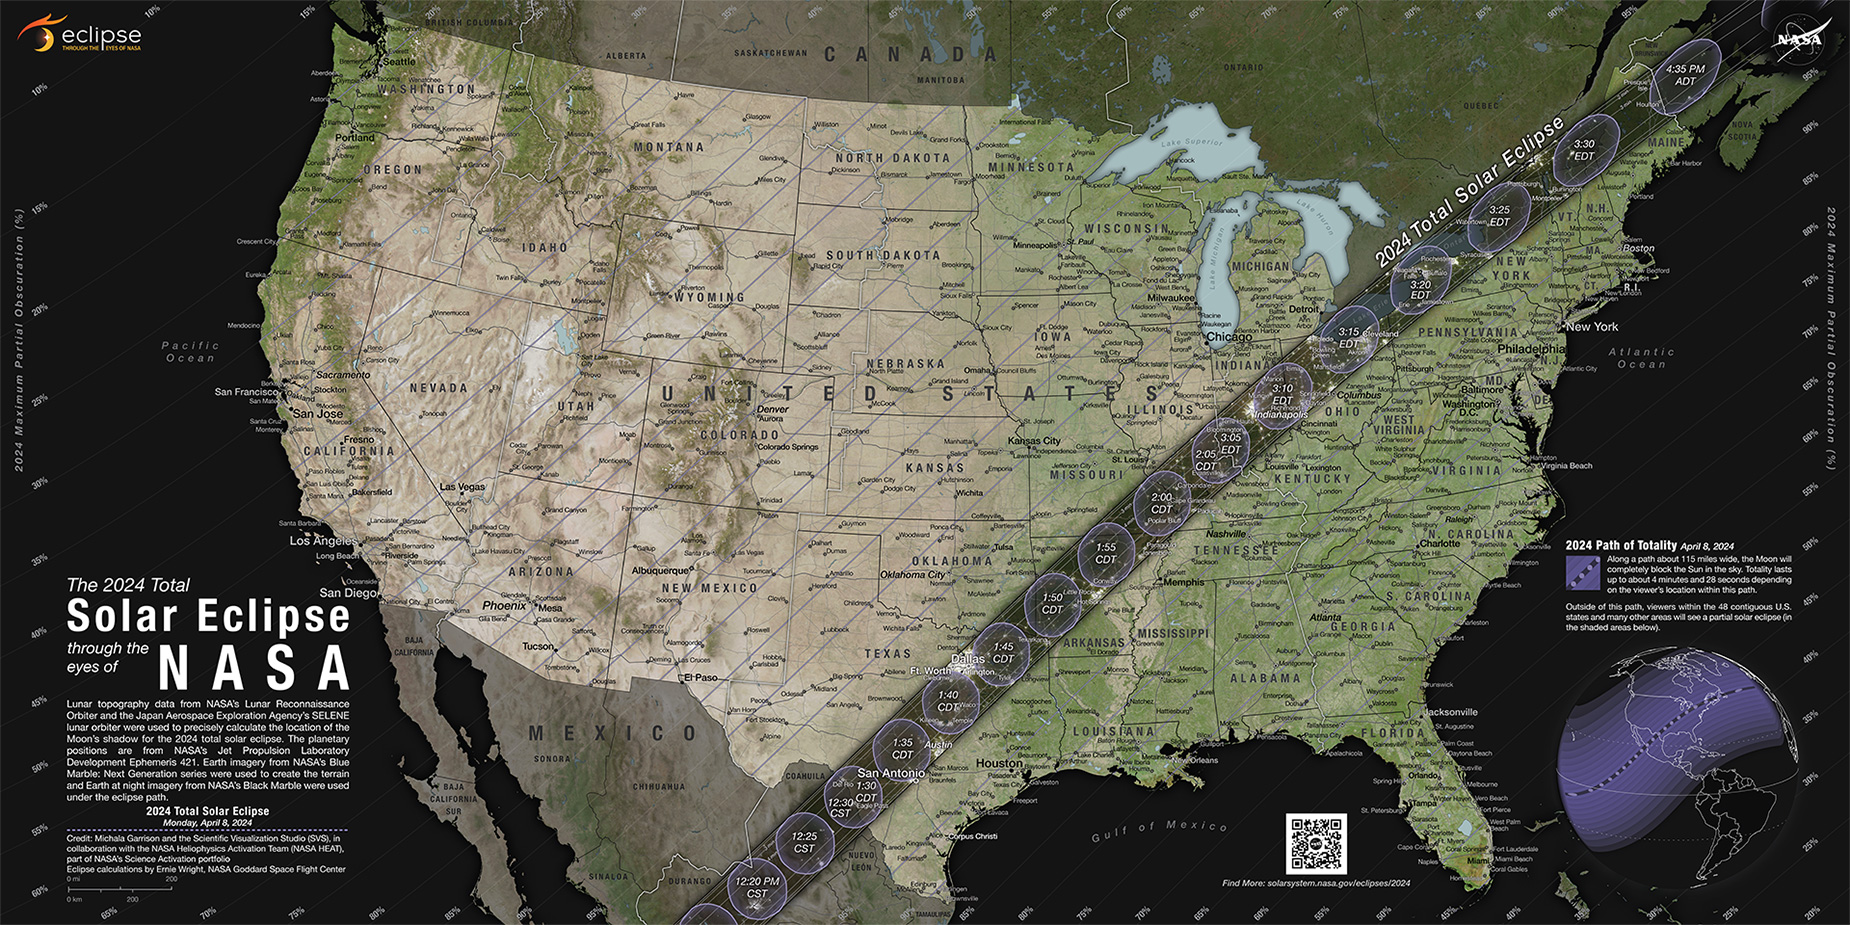 NASA's map for the total solar eclipse shows the path of totality and partial contours crossing the US.